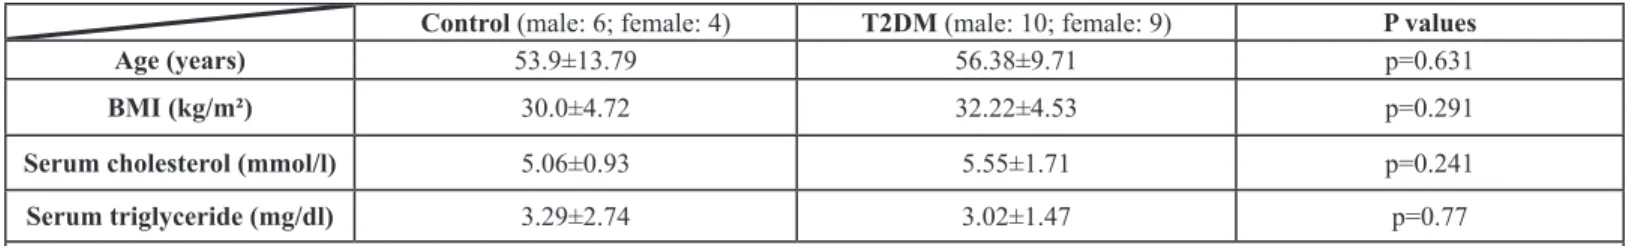 Table 1: Age, BMI, cholesterol and triglyceride levels in patients with T2DM and control subjects.